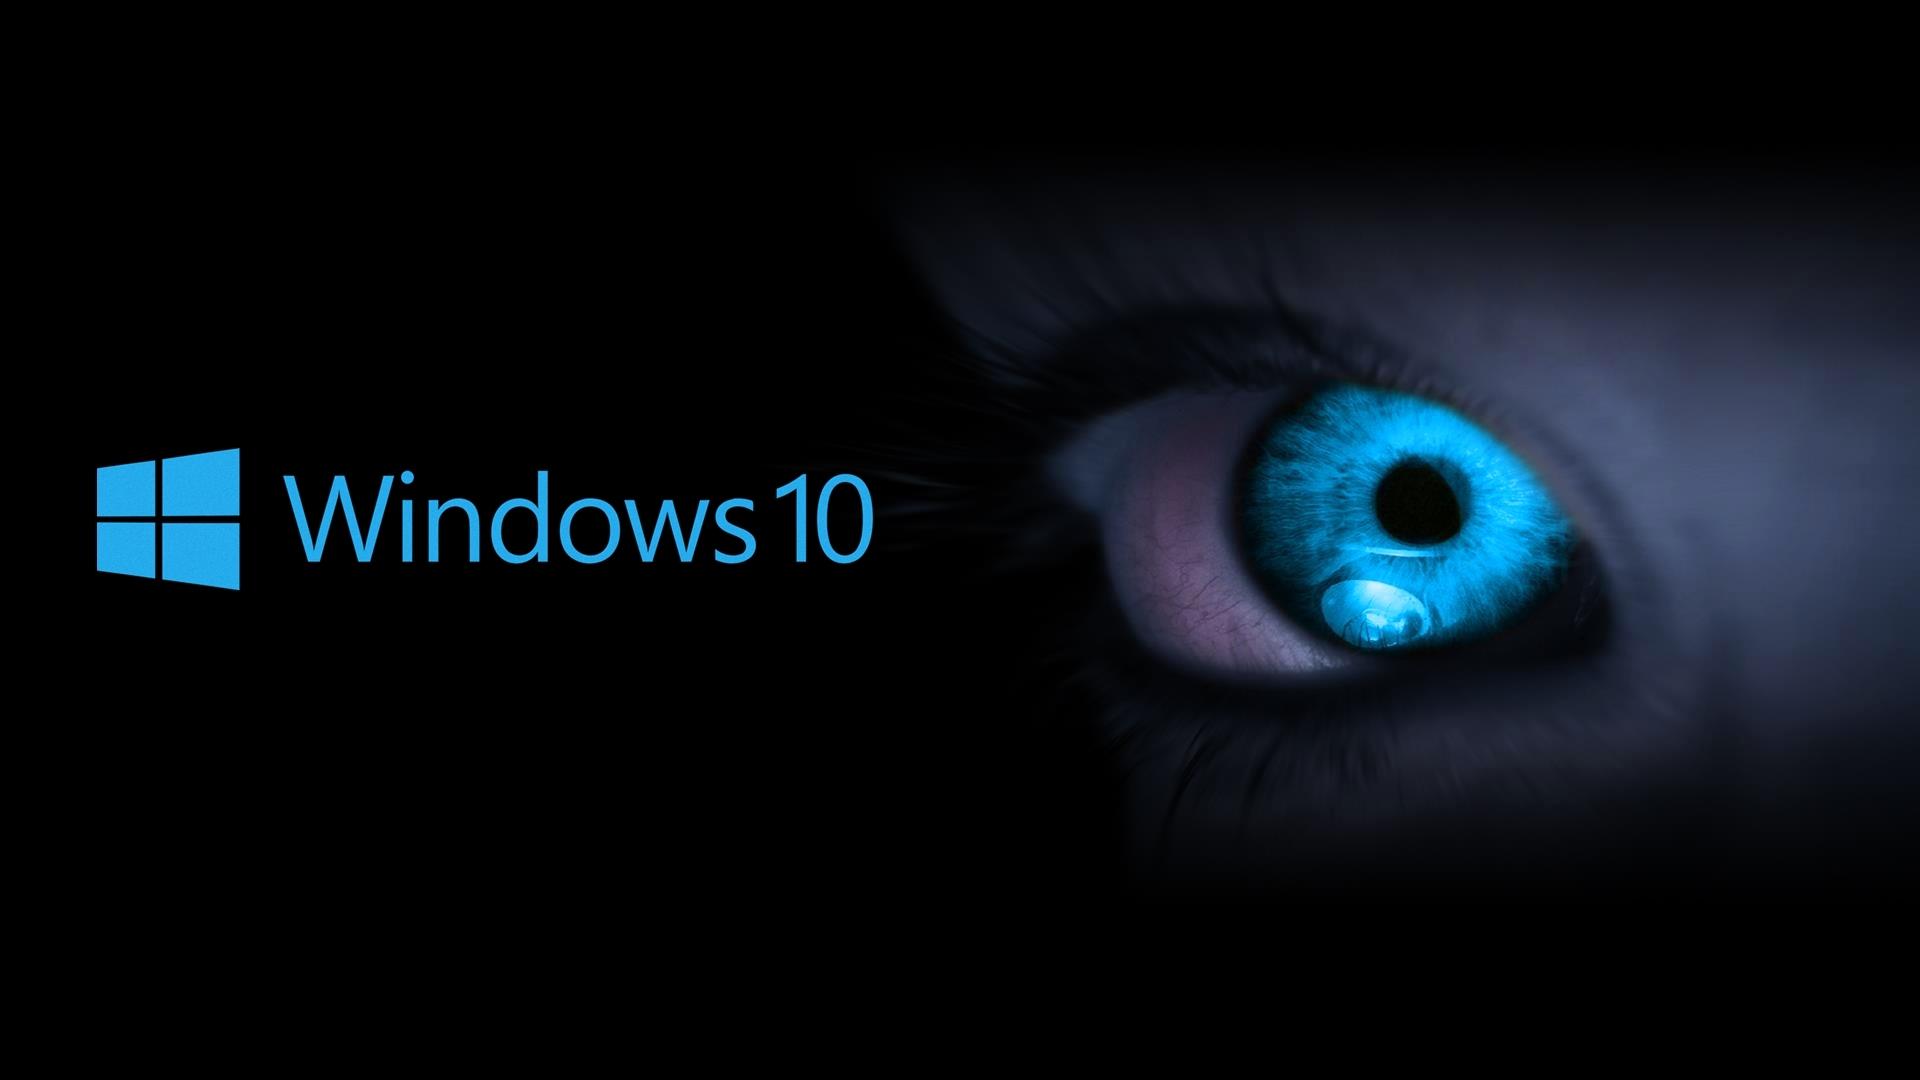 Eye tracking within Windows 10's Fall Creators Update is an assistive  technology with potential